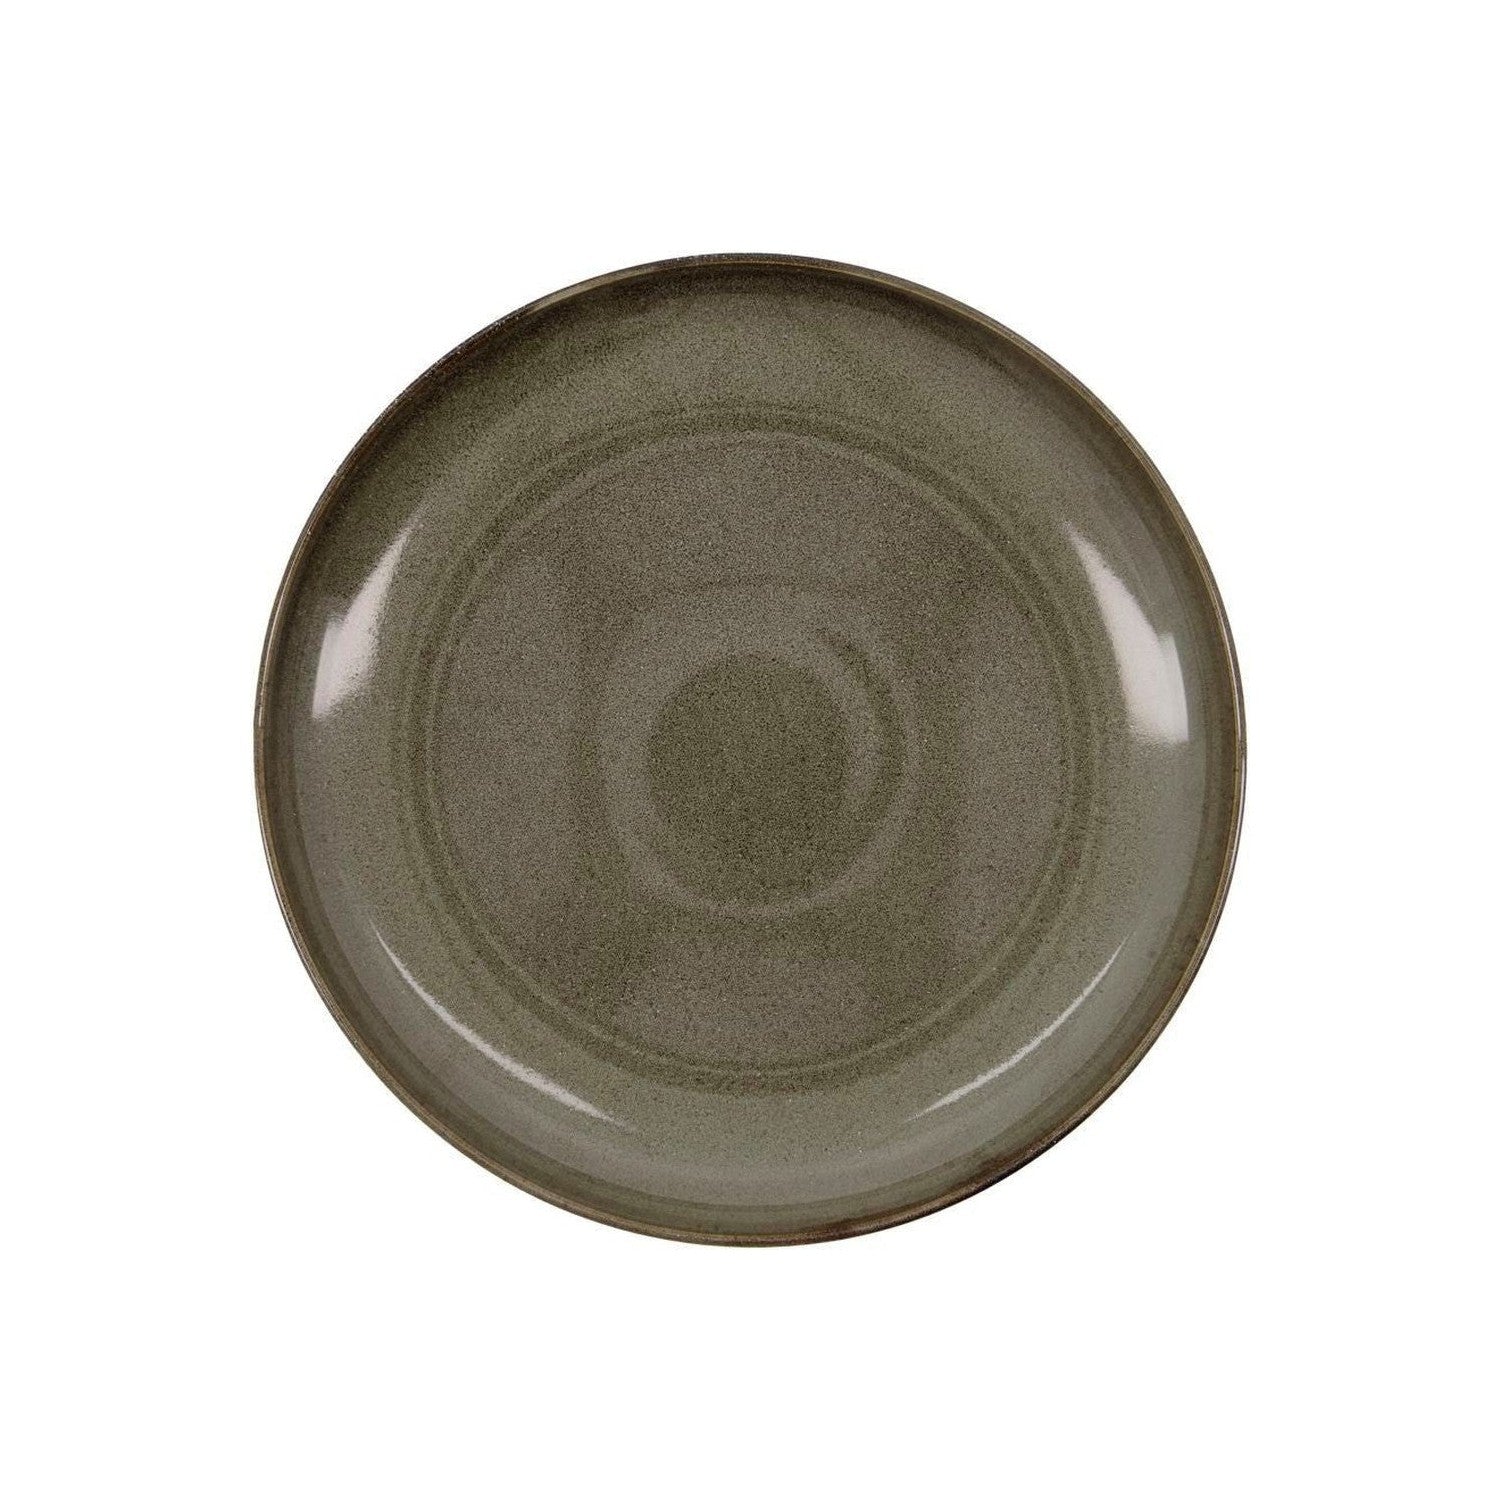 House Doctor Serving dish, HDLake, Green